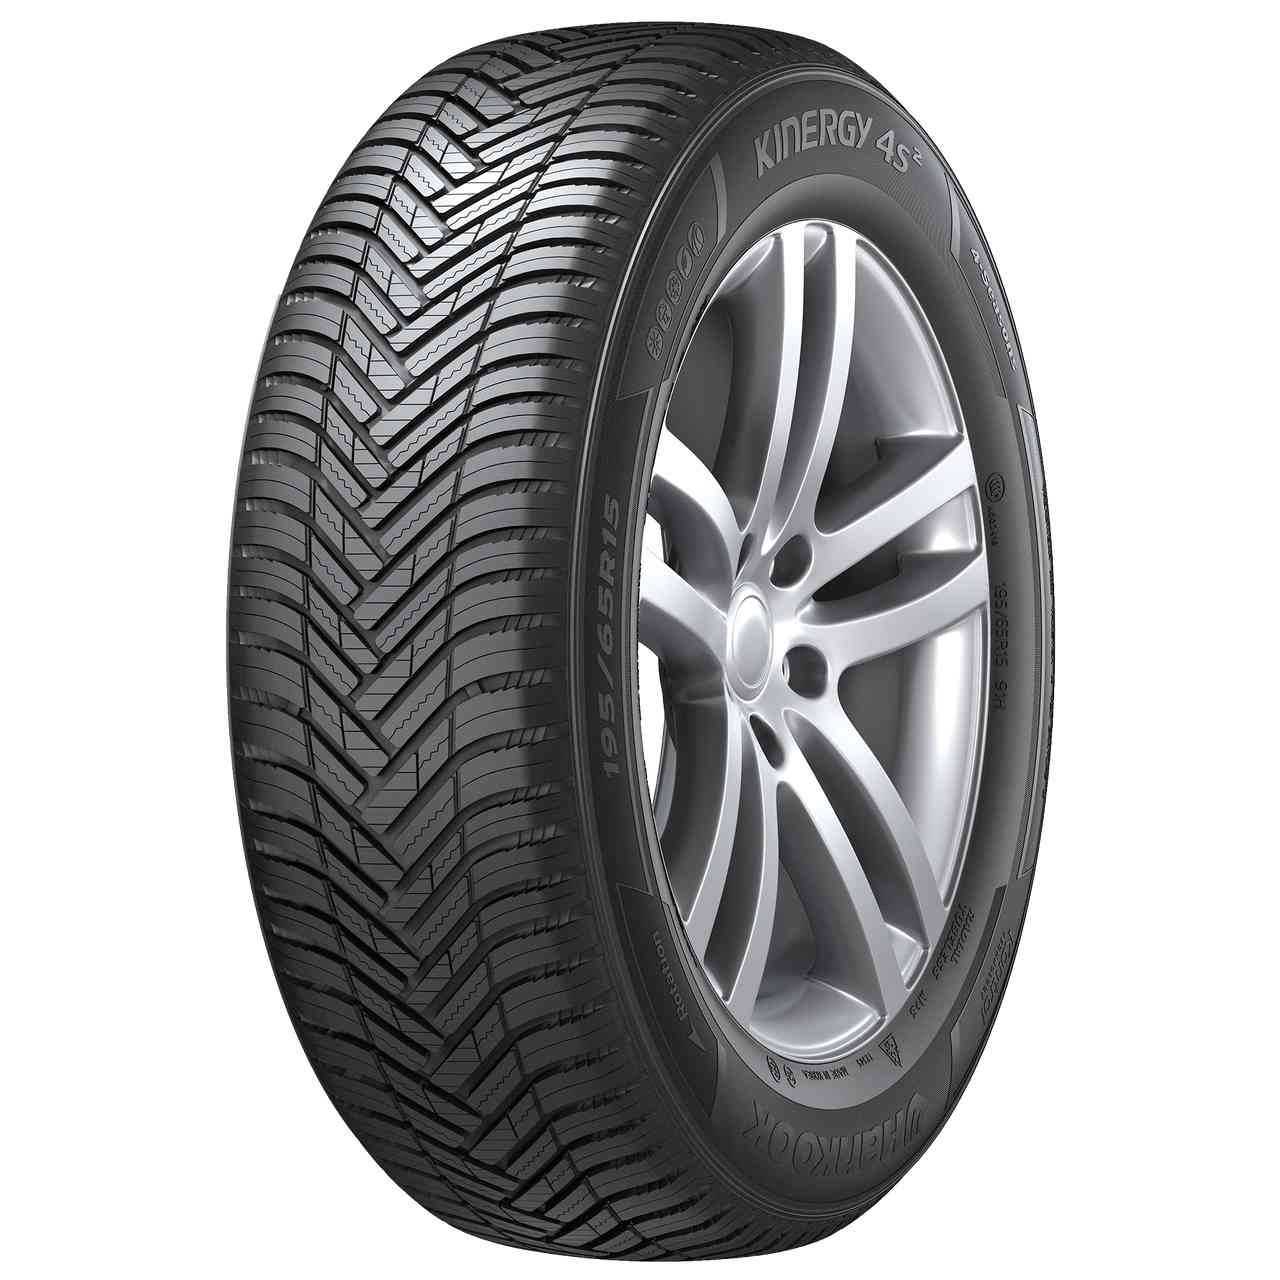 HANKOOK KINERGY 4S 2 (H750) 235/40ZR18 95Y BSW